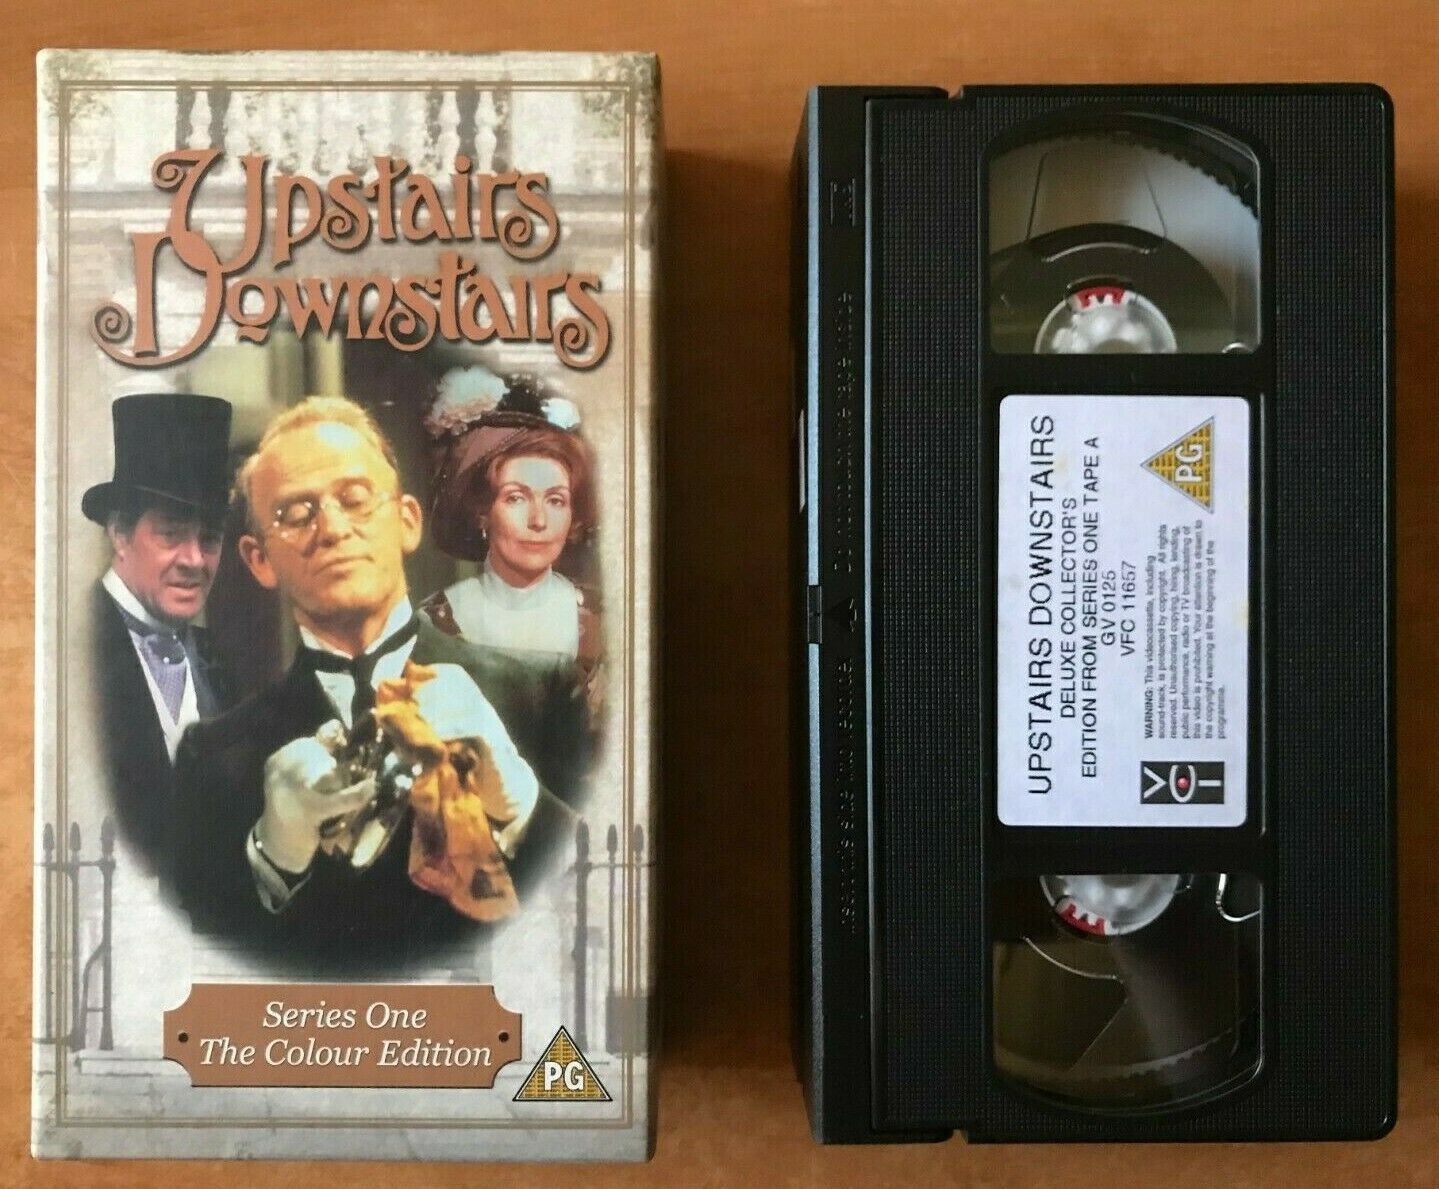 Upstairs Downstairs (Series One): On Trial [Colour Edition] Jean Marsh - Pal VHS-